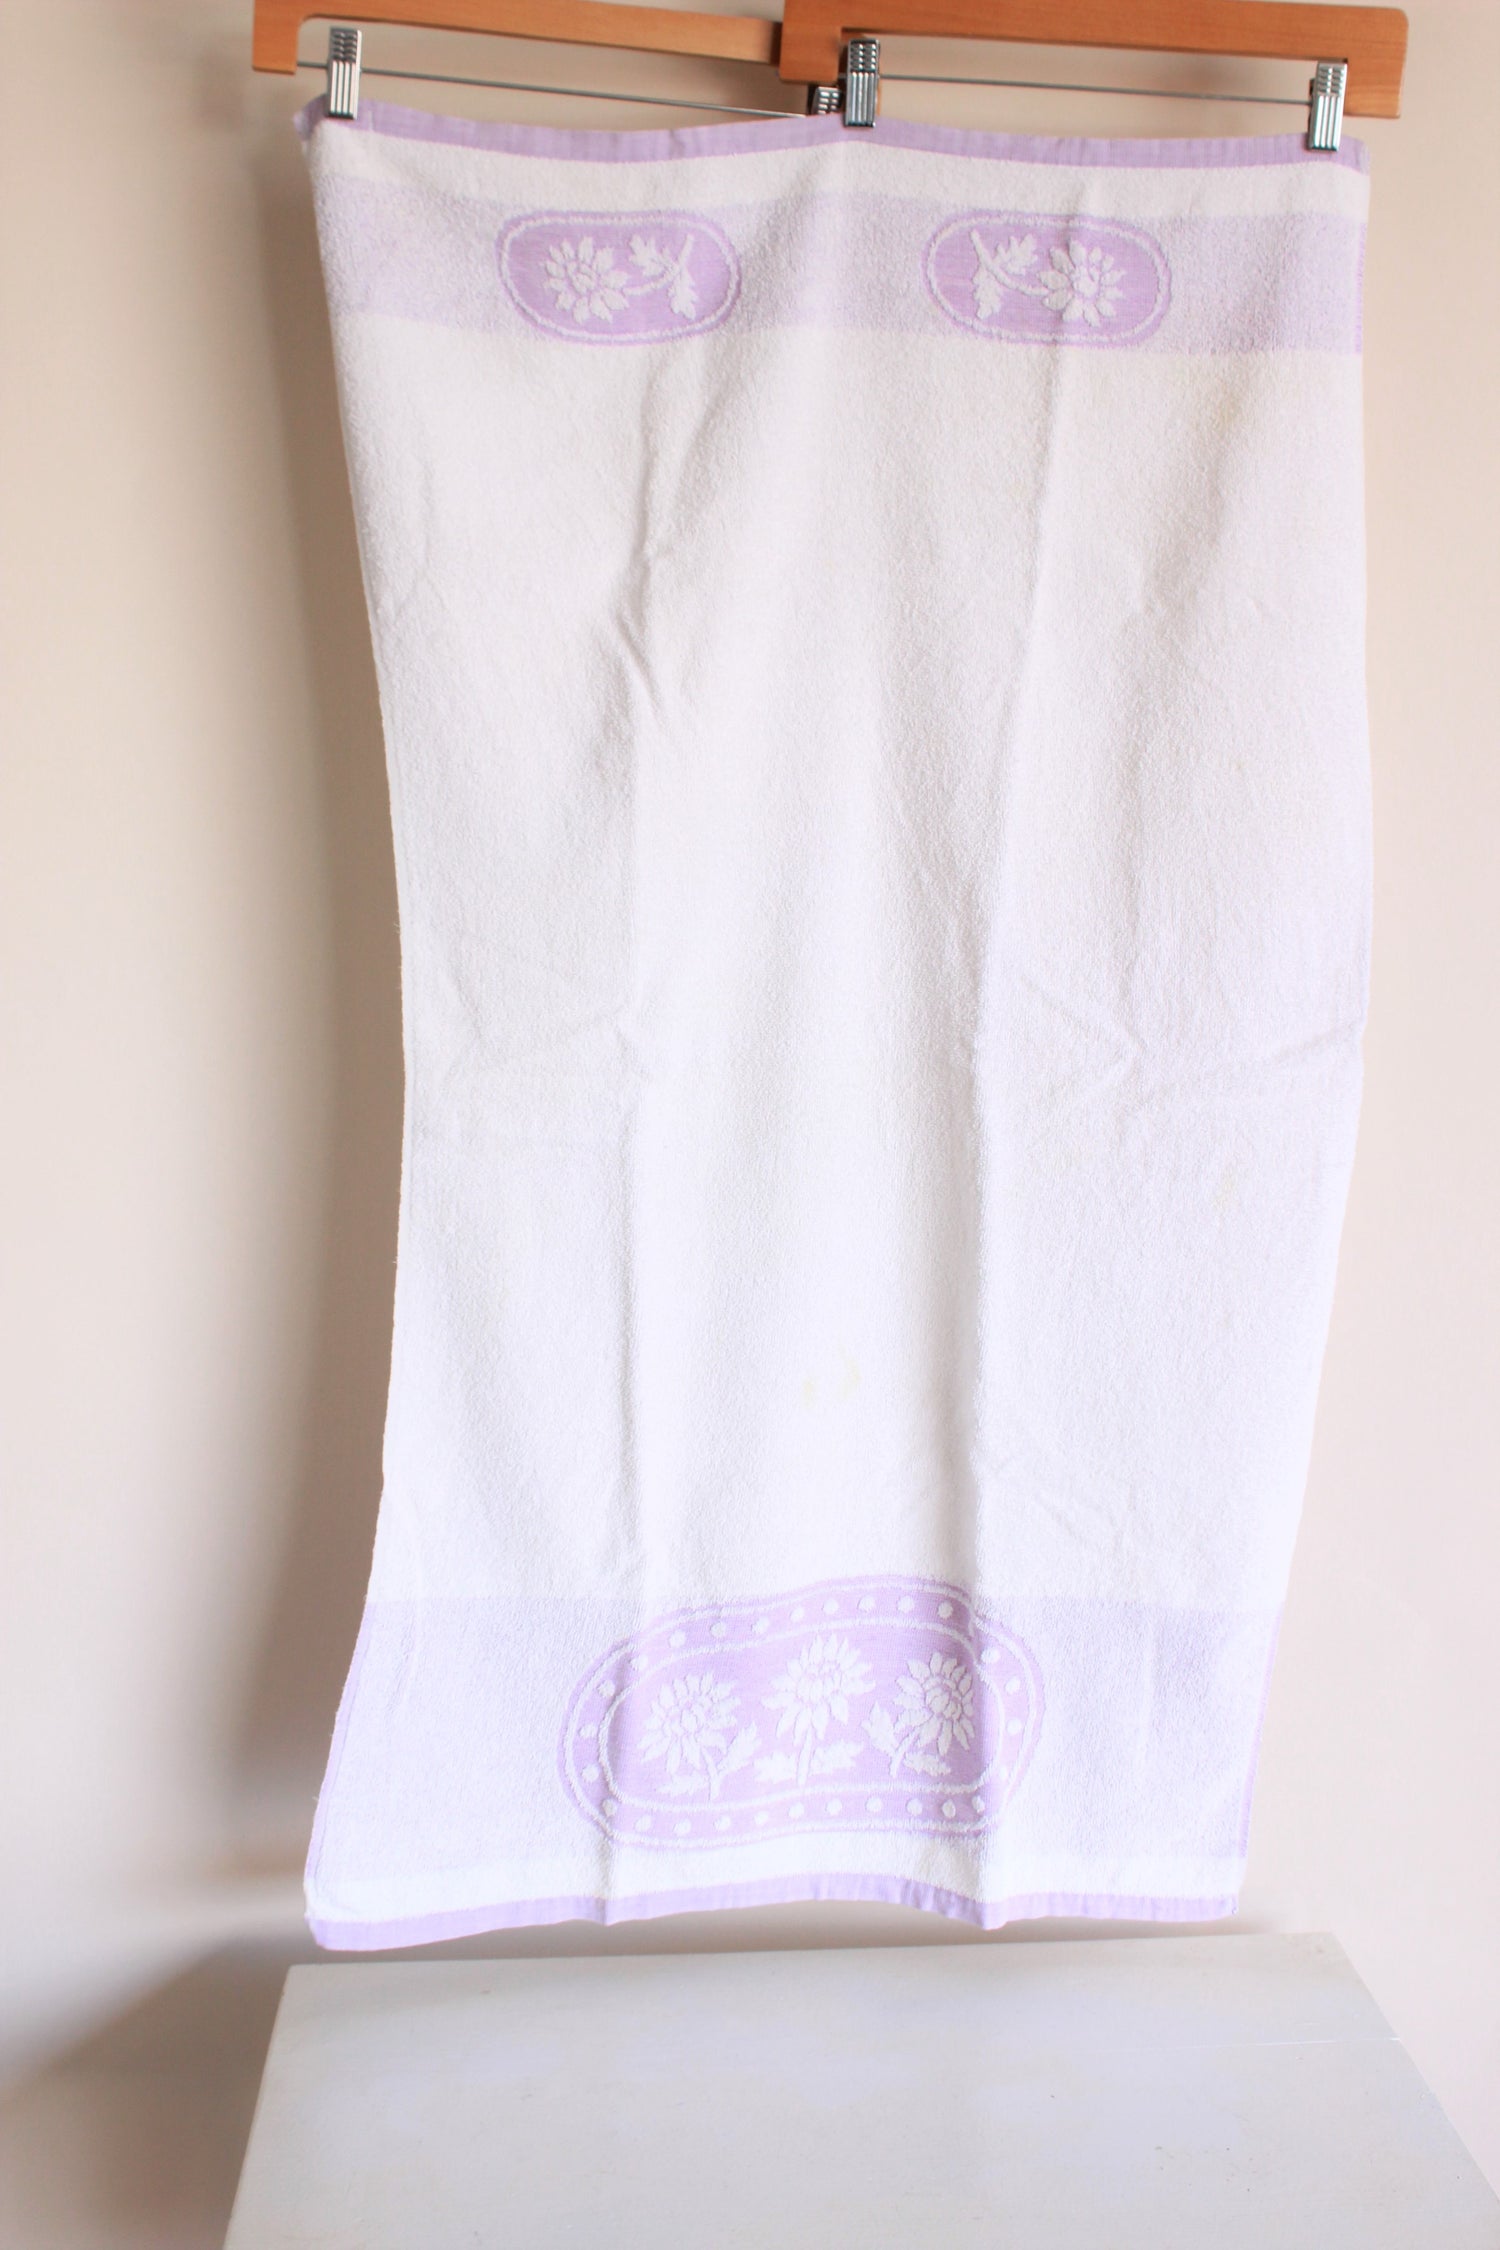 Vintage 1980s Martex Terrycloth Towel In Purple And White